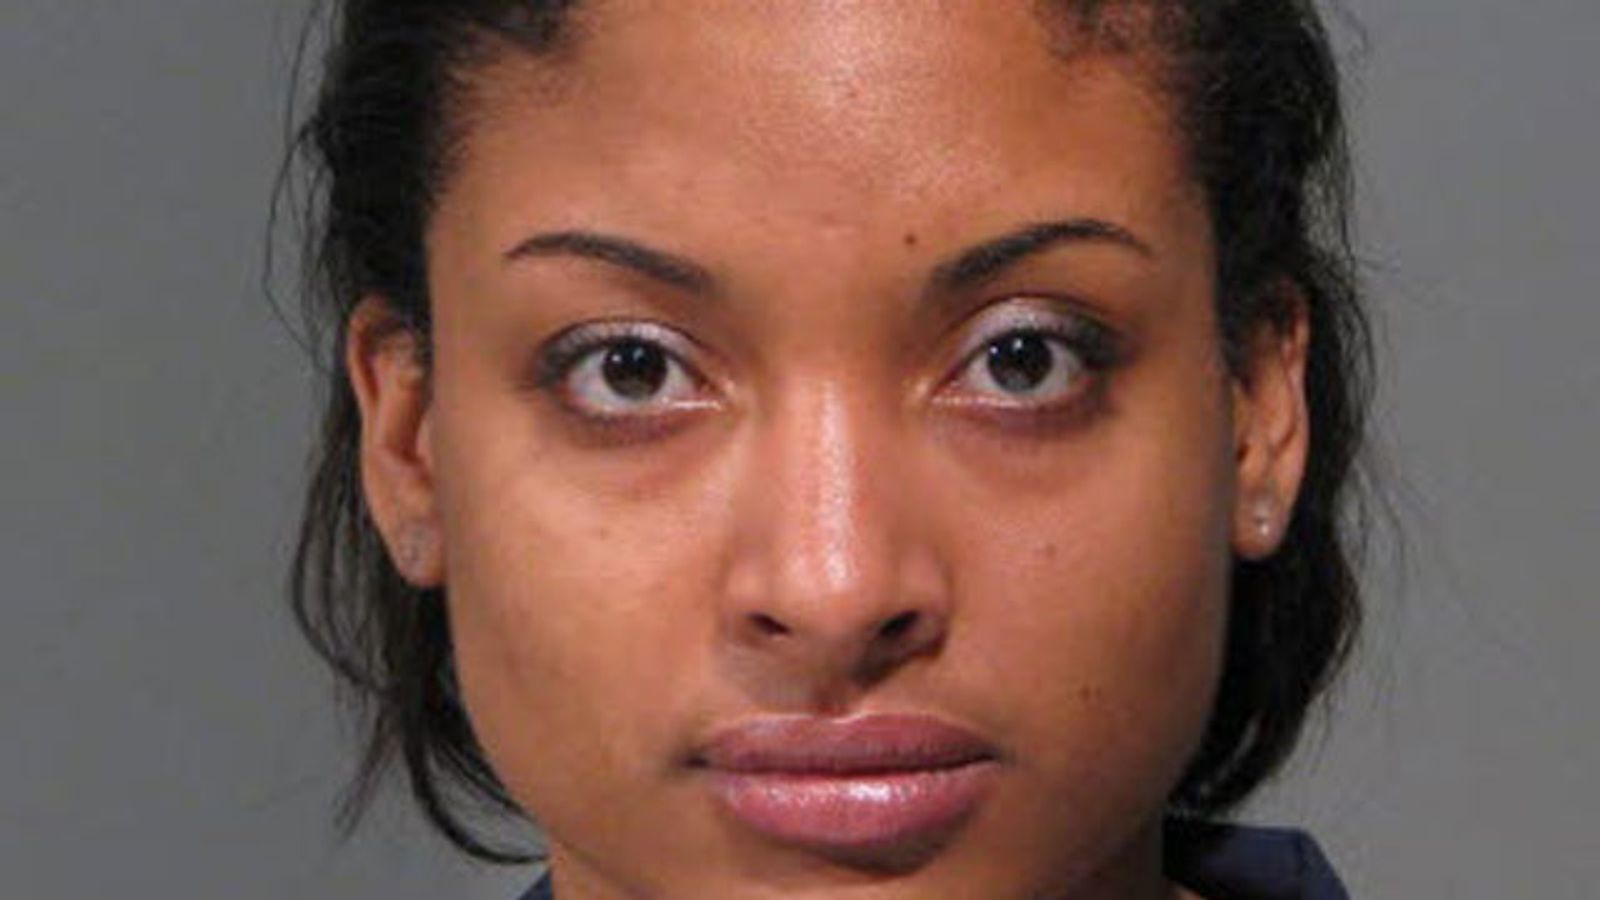 Sierra Sanchez Pleads Guilty to Single Prostitution Charge